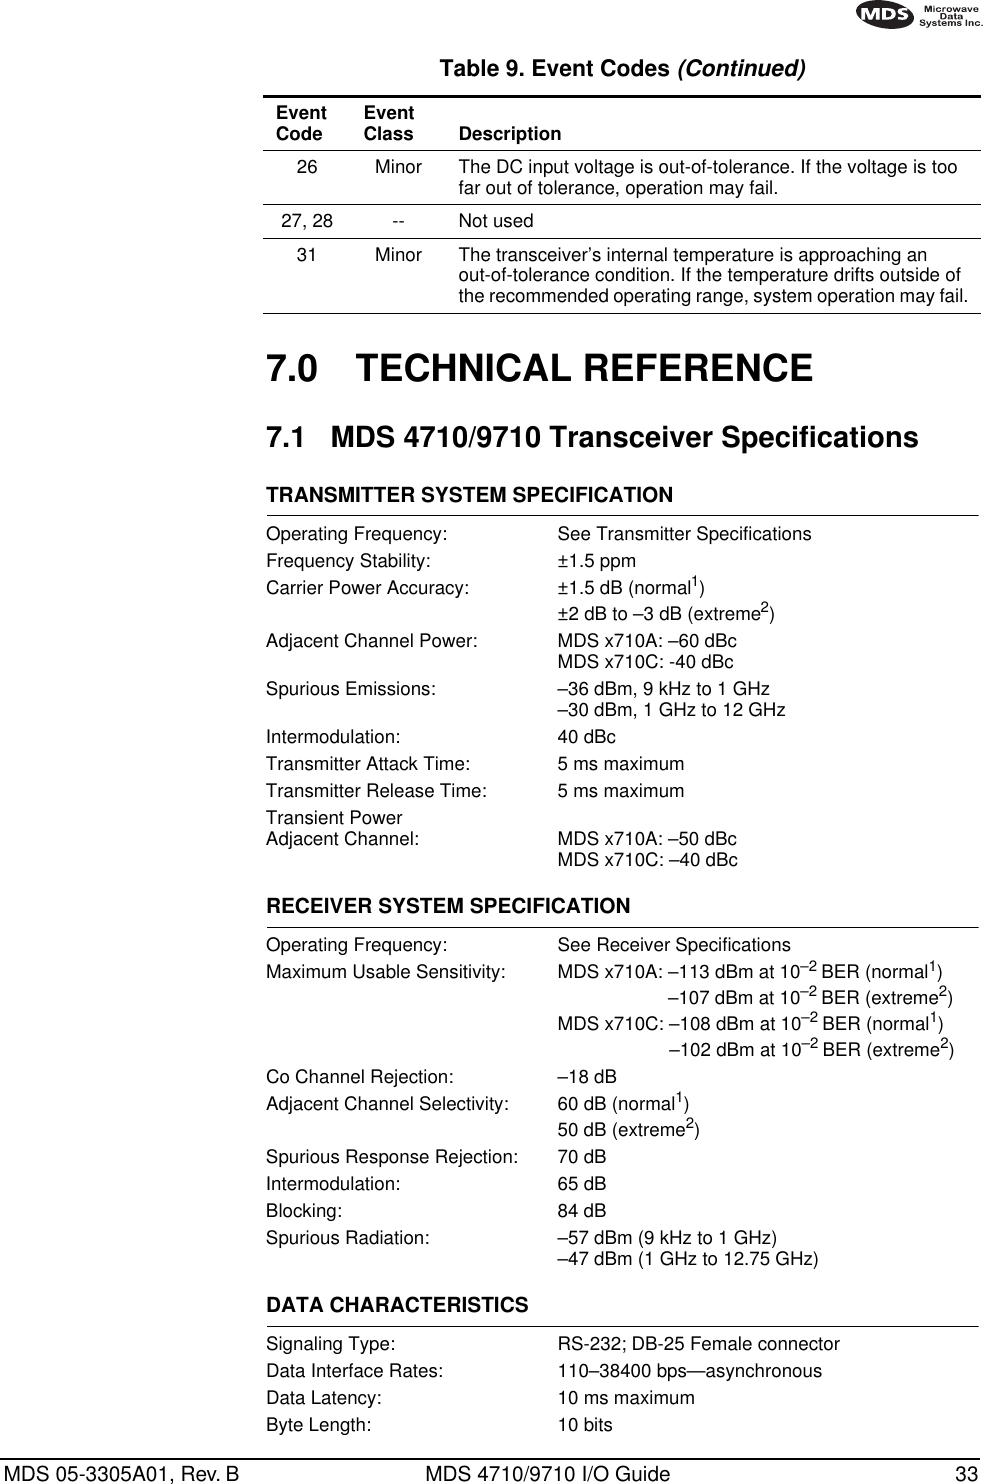 MDS 05-3305A01, Rev. B MDS 4710/9710 I/O Guide 337.0 TECHNICAL REFERENCE7.1 MDS 4710/9710 Transceiver SpecificationsTRANSMITTER SYSTEM SPECIFICATIONOperating Frequency: See Transmitter SpecificationsFrequency Stability: ±1.5 ppmCarrier Power Accuracy: ±1.5 dB (normal1) ±2 dB to –3 dB (extreme2)Adjacent Channel Power: MDS x710A: –60 dBcMDS x710C: -40 dBcSpurious Emissions: –36 dBm, 9 kHz to 1 GHz–30 dBm, 1 GHz to 12 GHzIntermodulation: 40 dBcTransmitter Attack Time: 5 ms maximumTransmitter Release Time: 5 ms maximumTransient Power Adjacent Channel: MDS x710A: –50 dBcMDS x710C: –40 dBcRECEIVER SYSTEM SPECIFICATIONOperating Frequency: See Receiver SpecificationsMaximum Usable Sensitivity: MDS x710A: –113 dBm at 10–2 BER (normal1)–107 dBm at 10–2 BER (extreme2)MDS x710C: –108 dBm at 10–2 BER (normal1)–102 dBm at 10–2 BER (extreme2)Co Channel Rejection: –18 dBAdjacent Channel Selectivity: 60 dB (normal1)50 dB (extreme2)Spurious Response Rejection: 70 dBIntermodulation: 65 dBBlocking: 84 dBSpurious Radiation: –57 dBm (9 kHz to 1 GHz)–47 dBm (1 GHz to 12.75 GHz)DATA CHARACTERISTICSSignaling Type: RS-232; DB-25 Female connectorData Interface Rates: 110–38400 bps—asynchronousData Latency: 10 ms maximumByte Length: 10 bits26 Minor The DC input voltage is out-of-tolerance. If the voltage is too far out of tolerance, operation may fail.27, 28 -- Not used31 Minor The transceiver’s internal temperature is approaching an out-of-tolerance condition. If the temperature drifts outside of the recommended operating range, system operation may fail.Table 9. Event Codes (Continued)Event Code Event Class Description